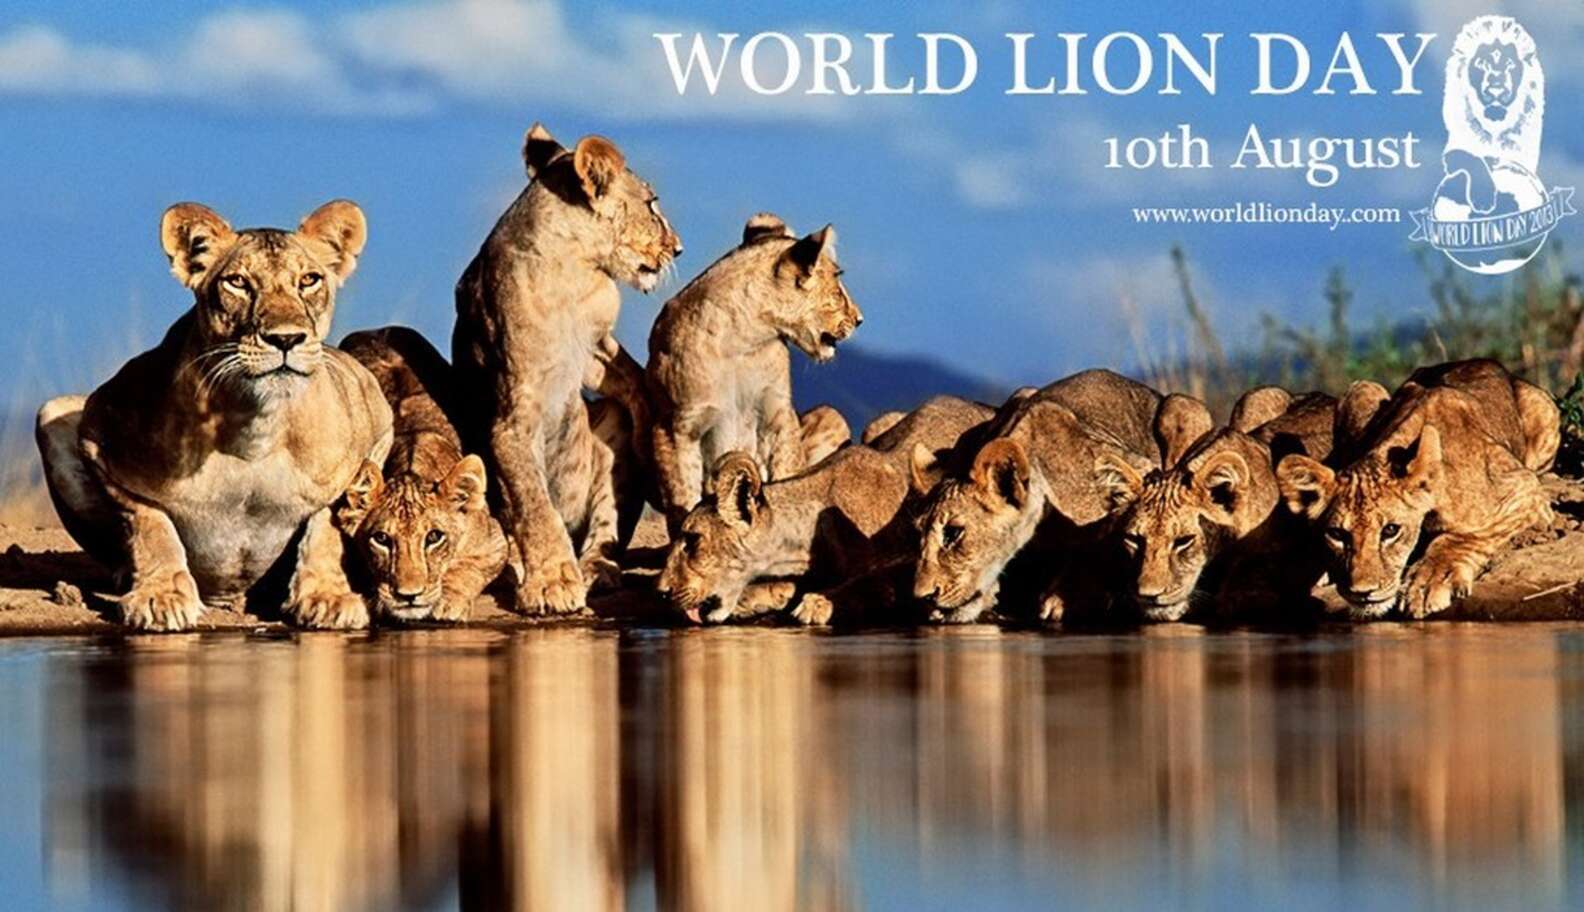 Today is World Lion Day! Celebrate by Taking Action! The Dodo